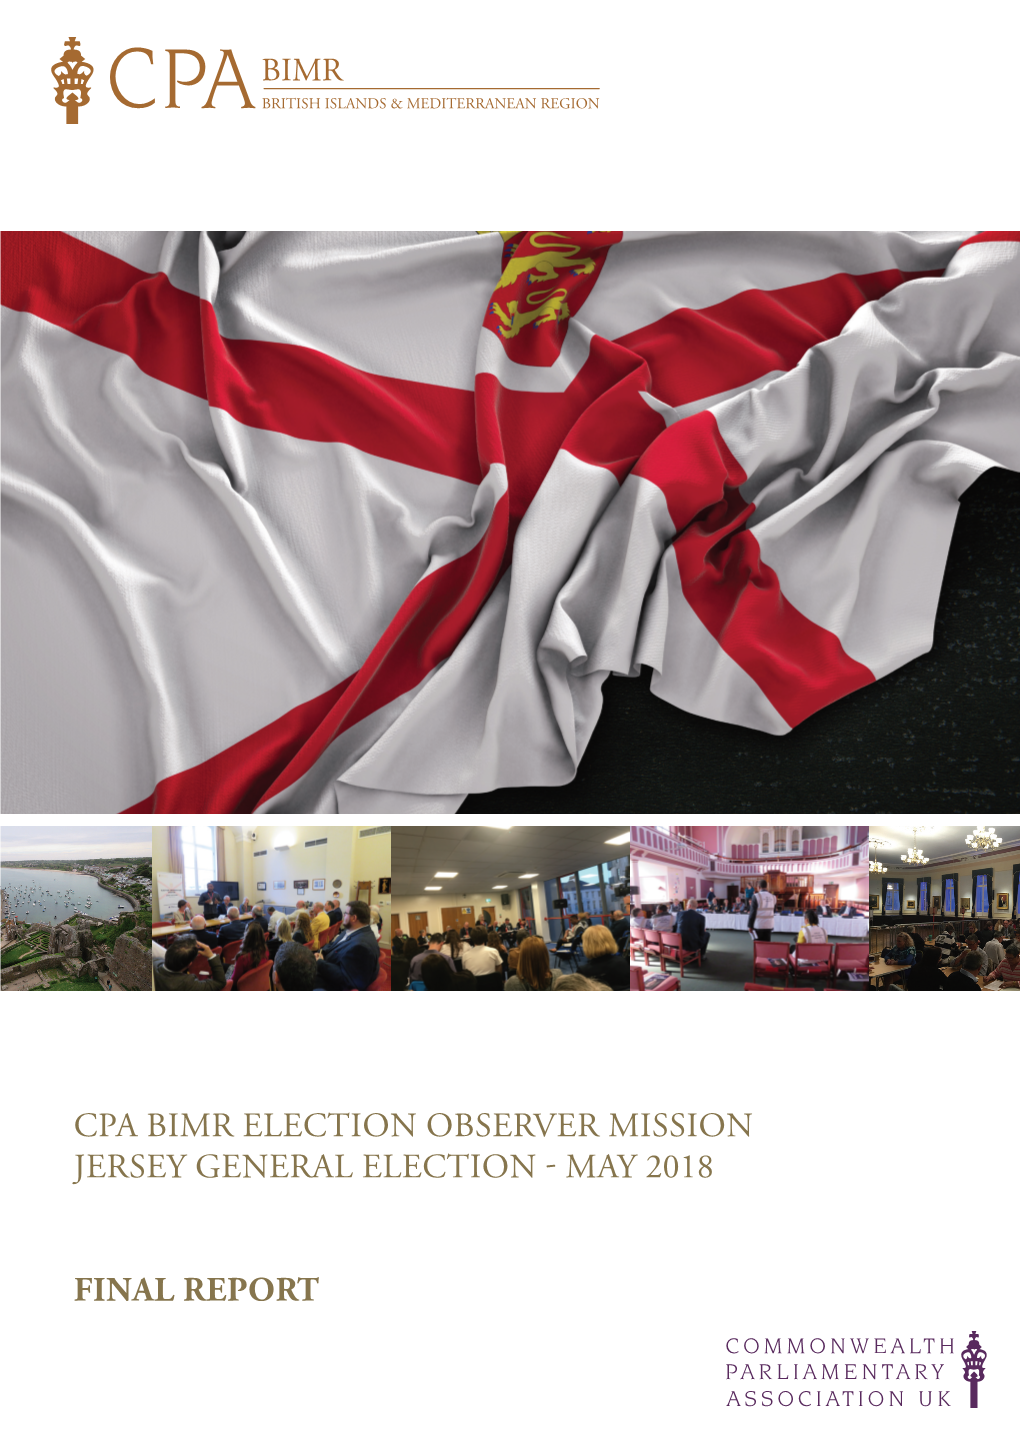 CPA BIMR Election Observation Mission to Jersey